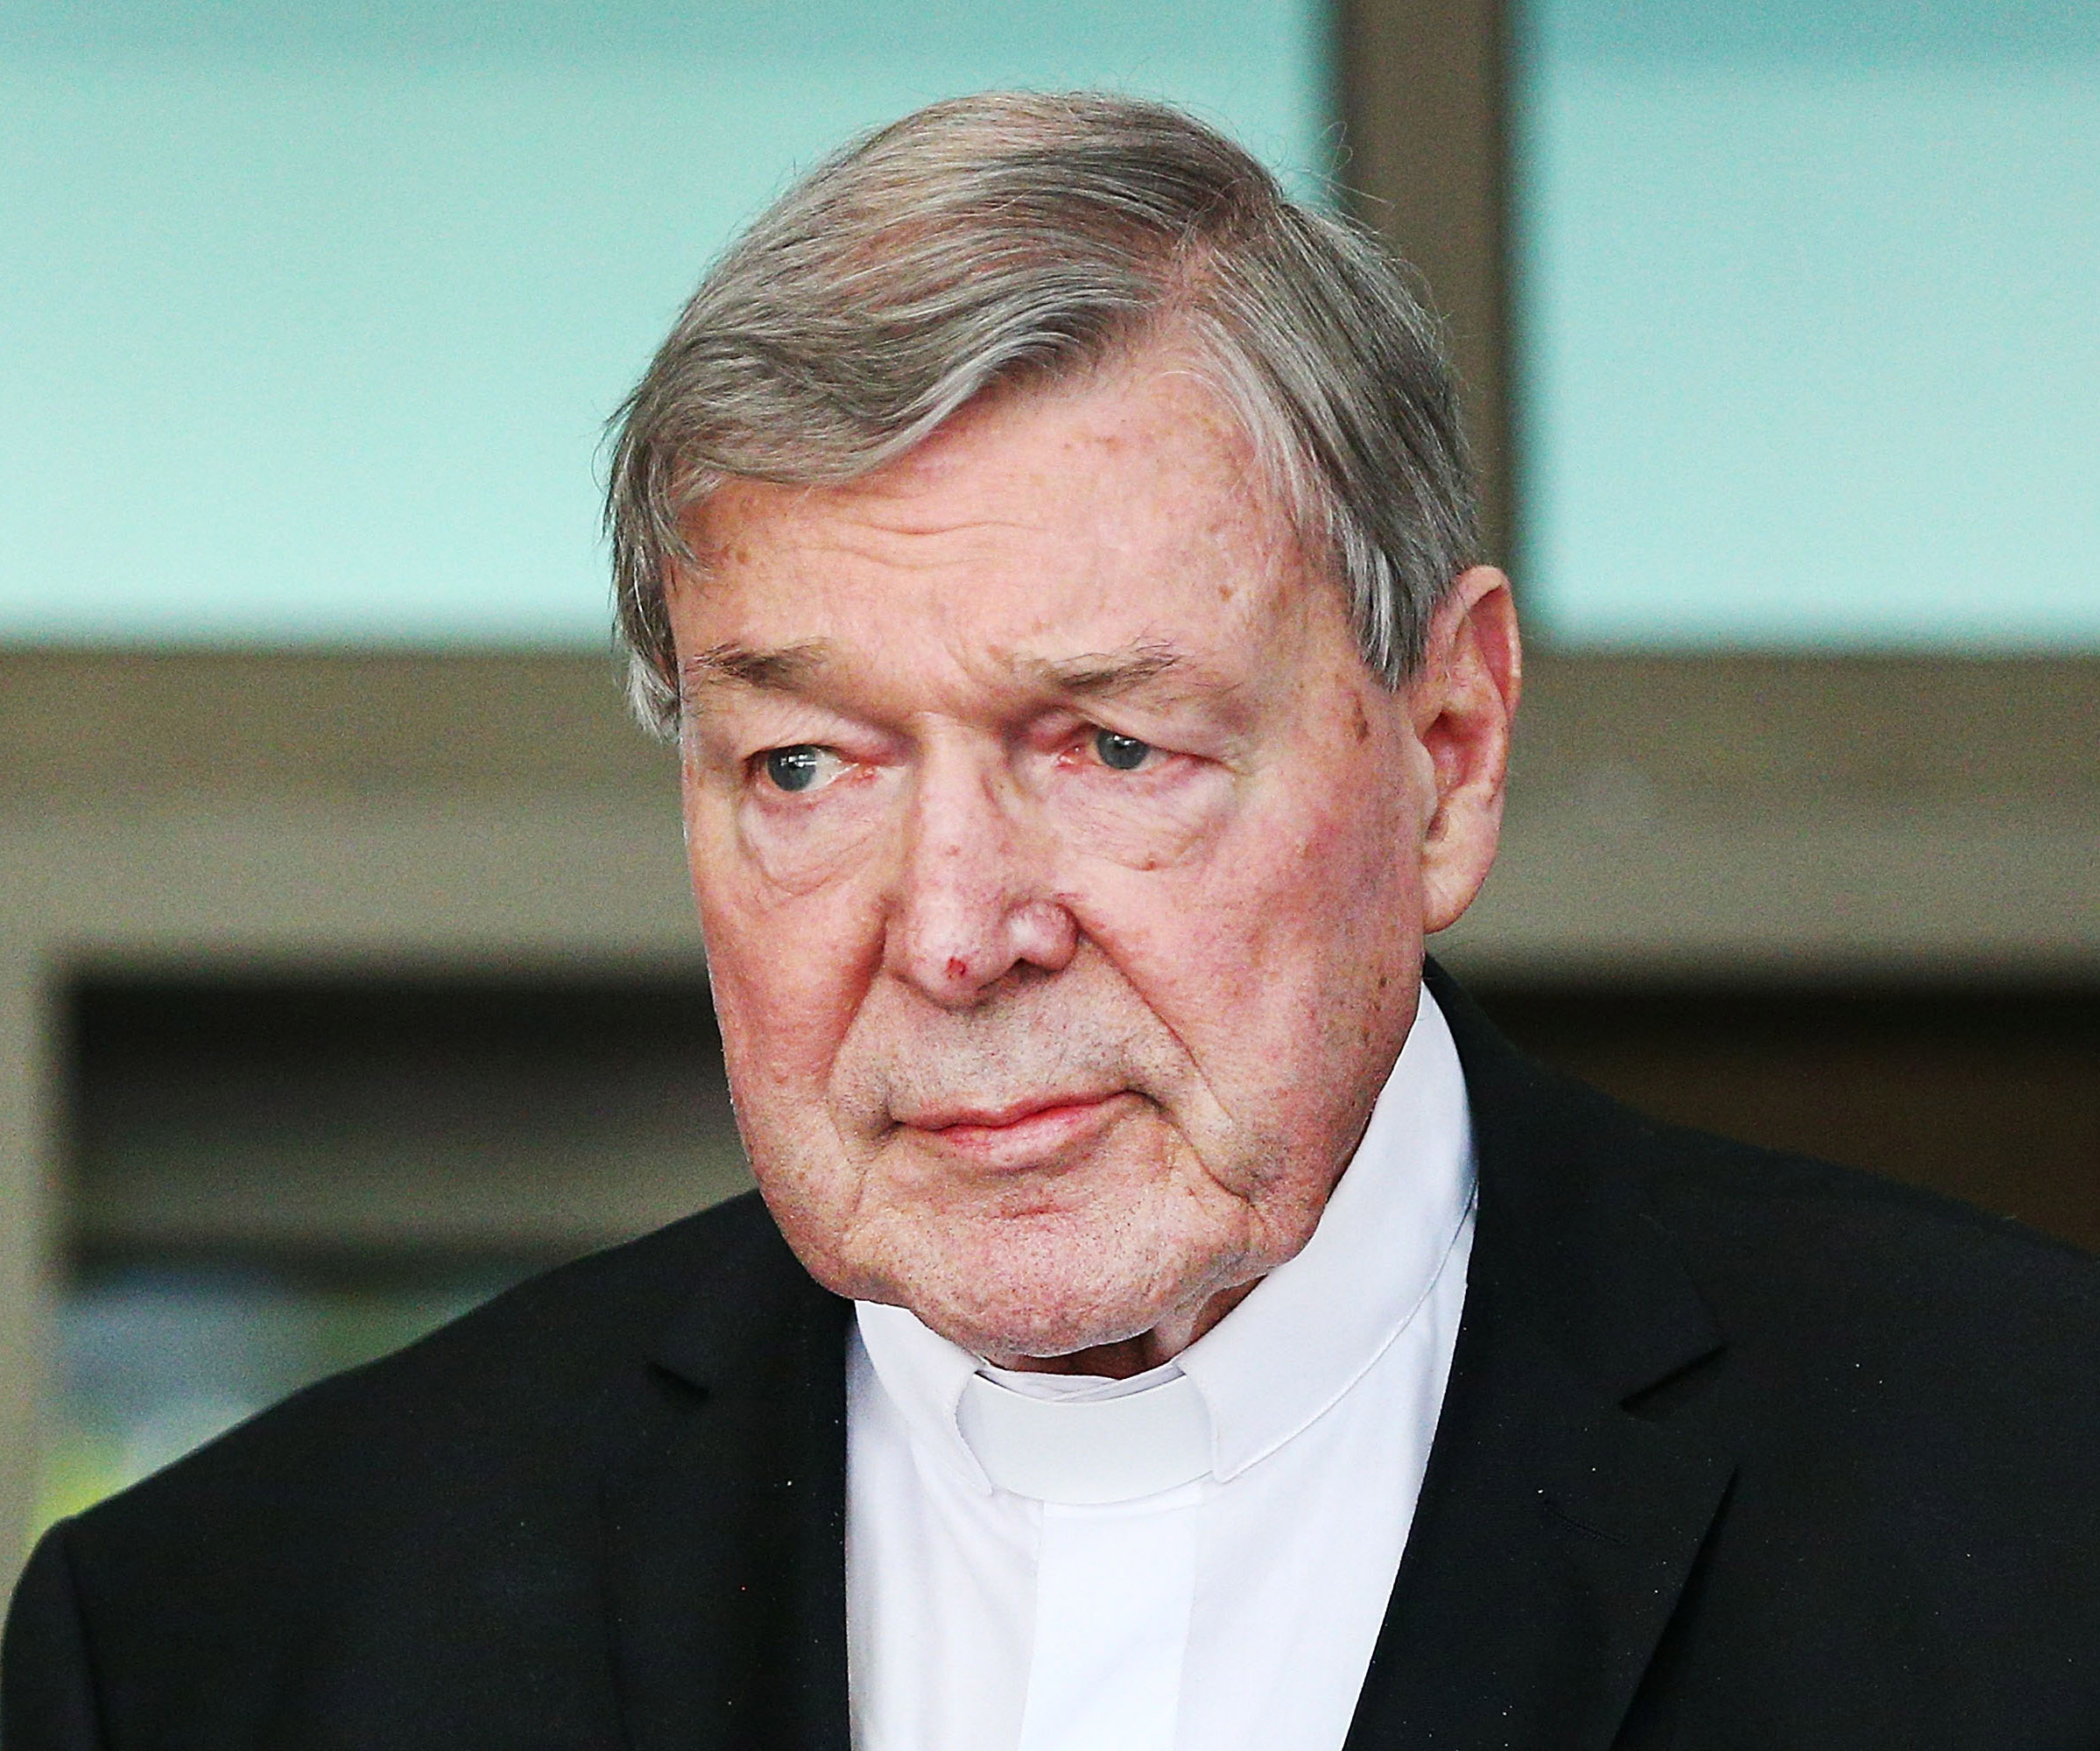 BREAKING: Cardinal George Pell found guilty of child sexual abuse